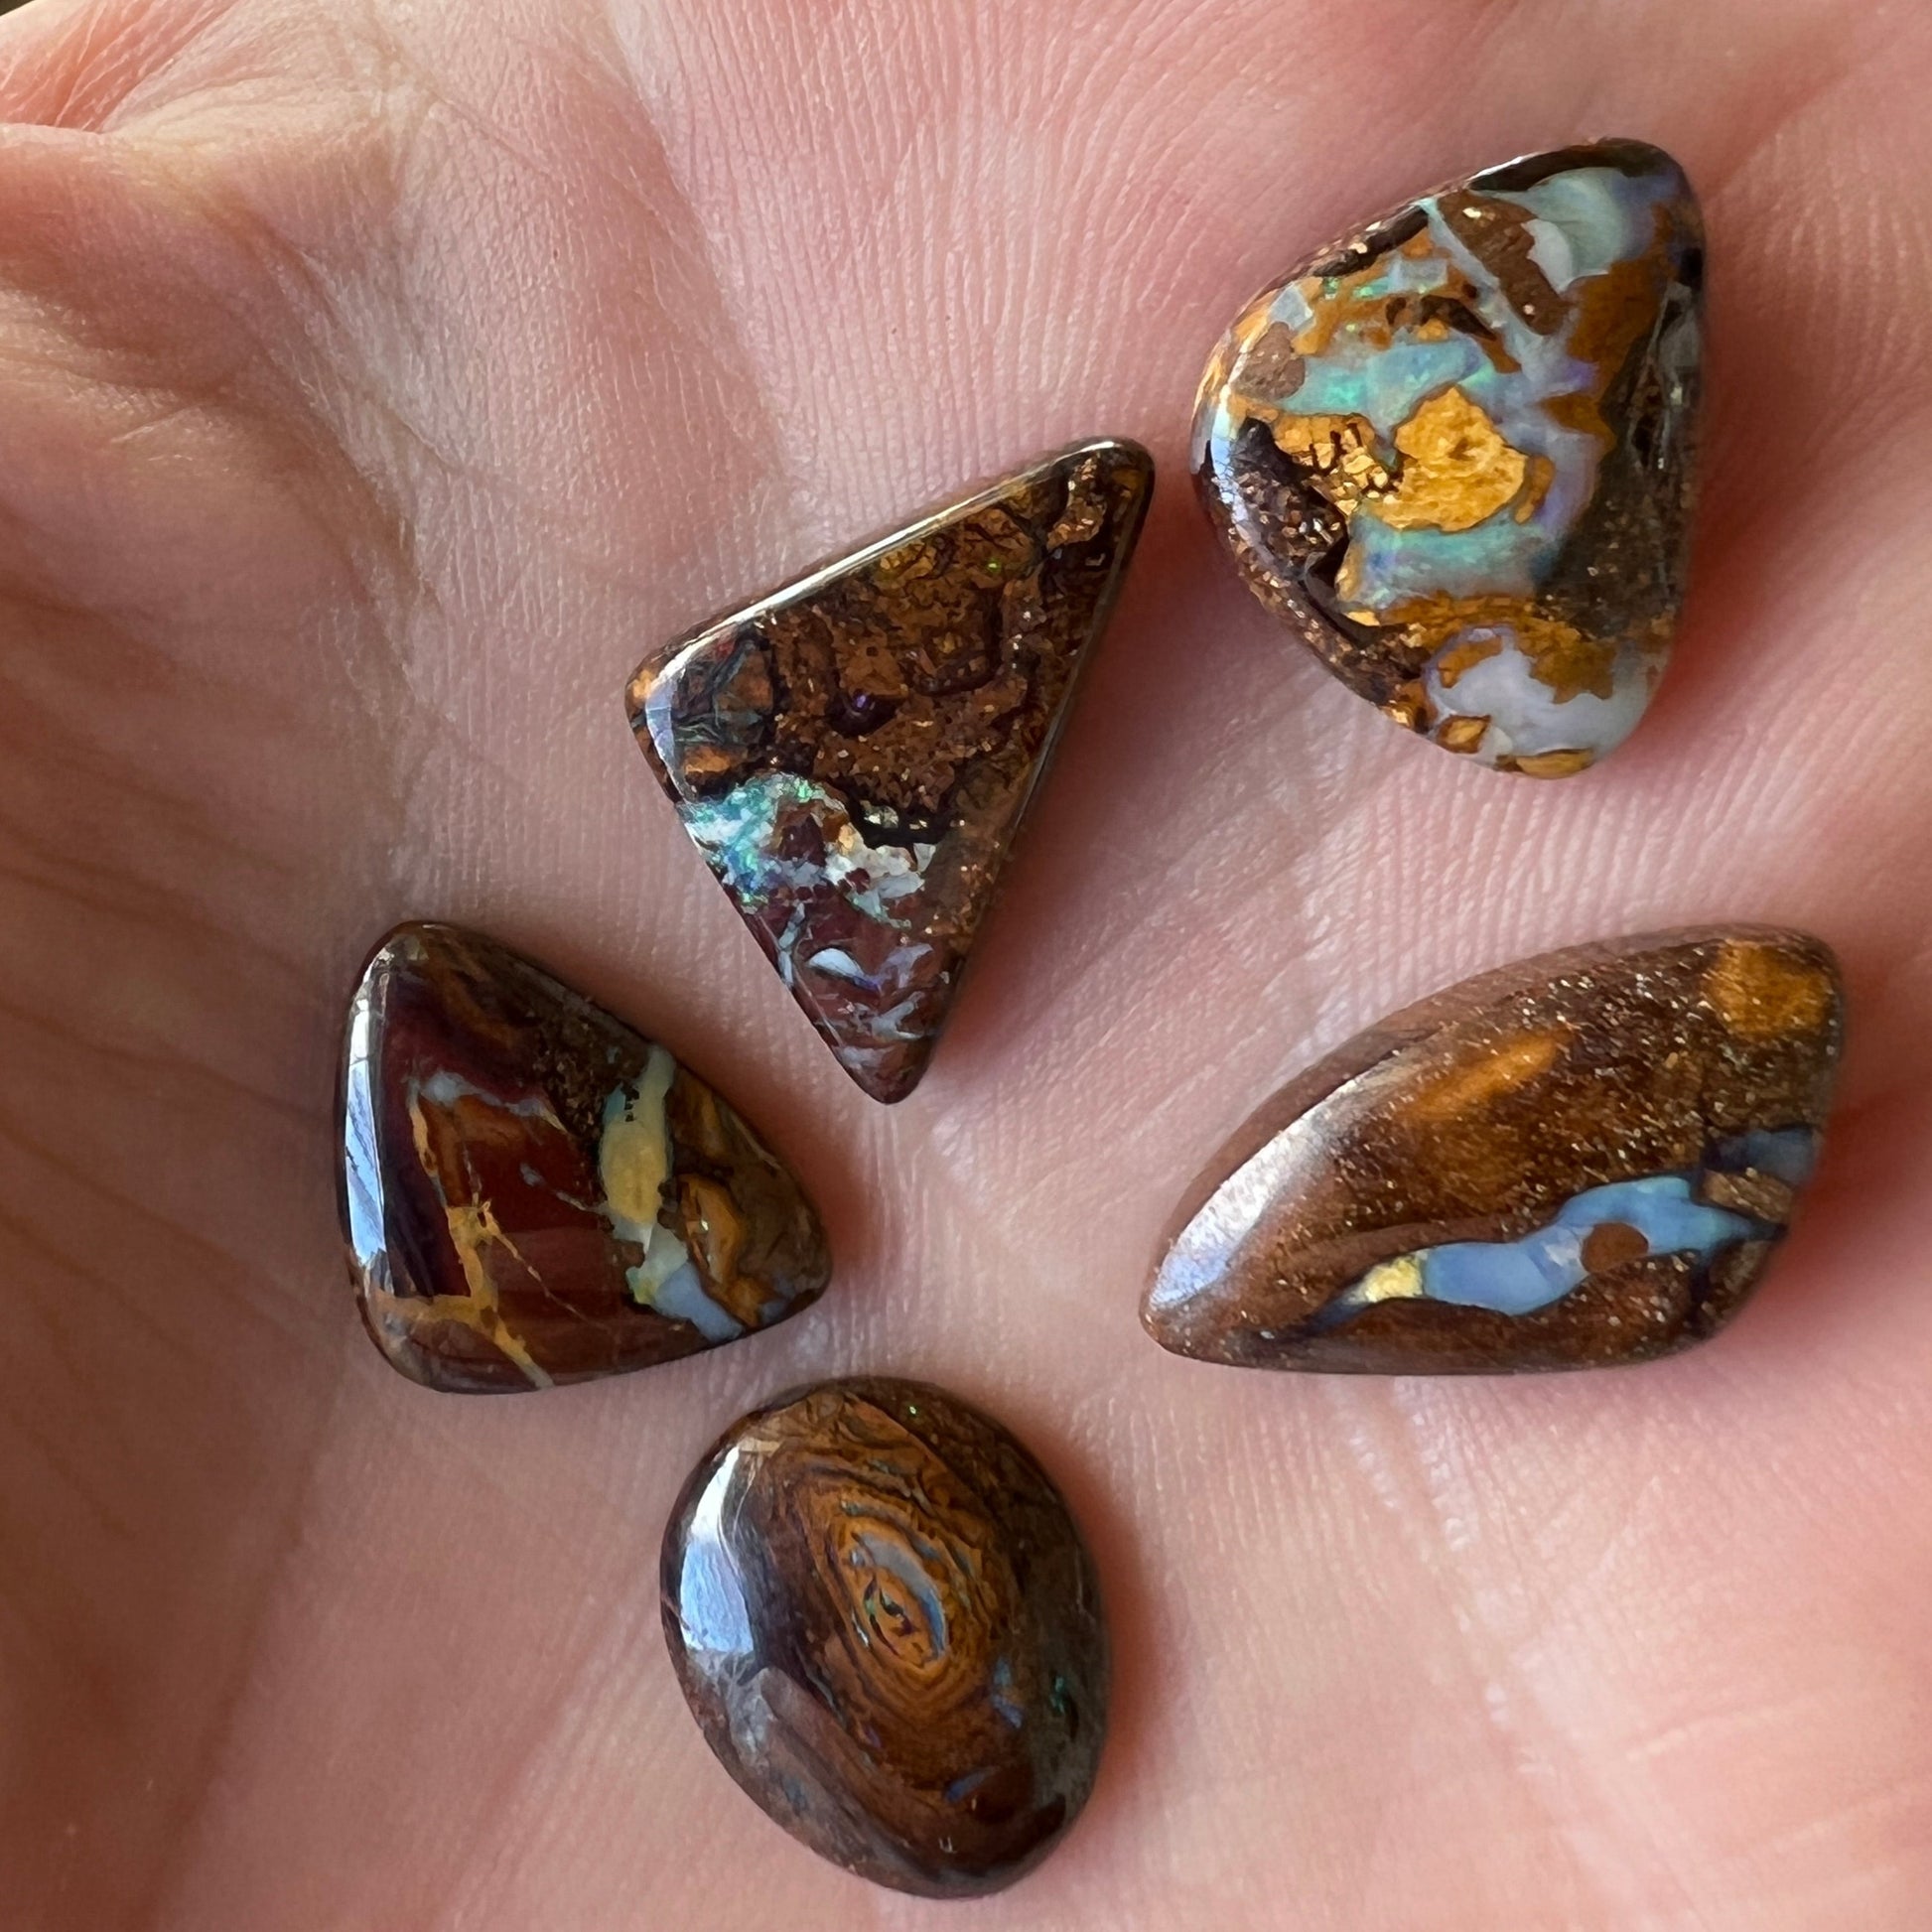 Boulder opal bundle containing 5 beautiful opals from Winton, Queensland. Polished and ready to set.